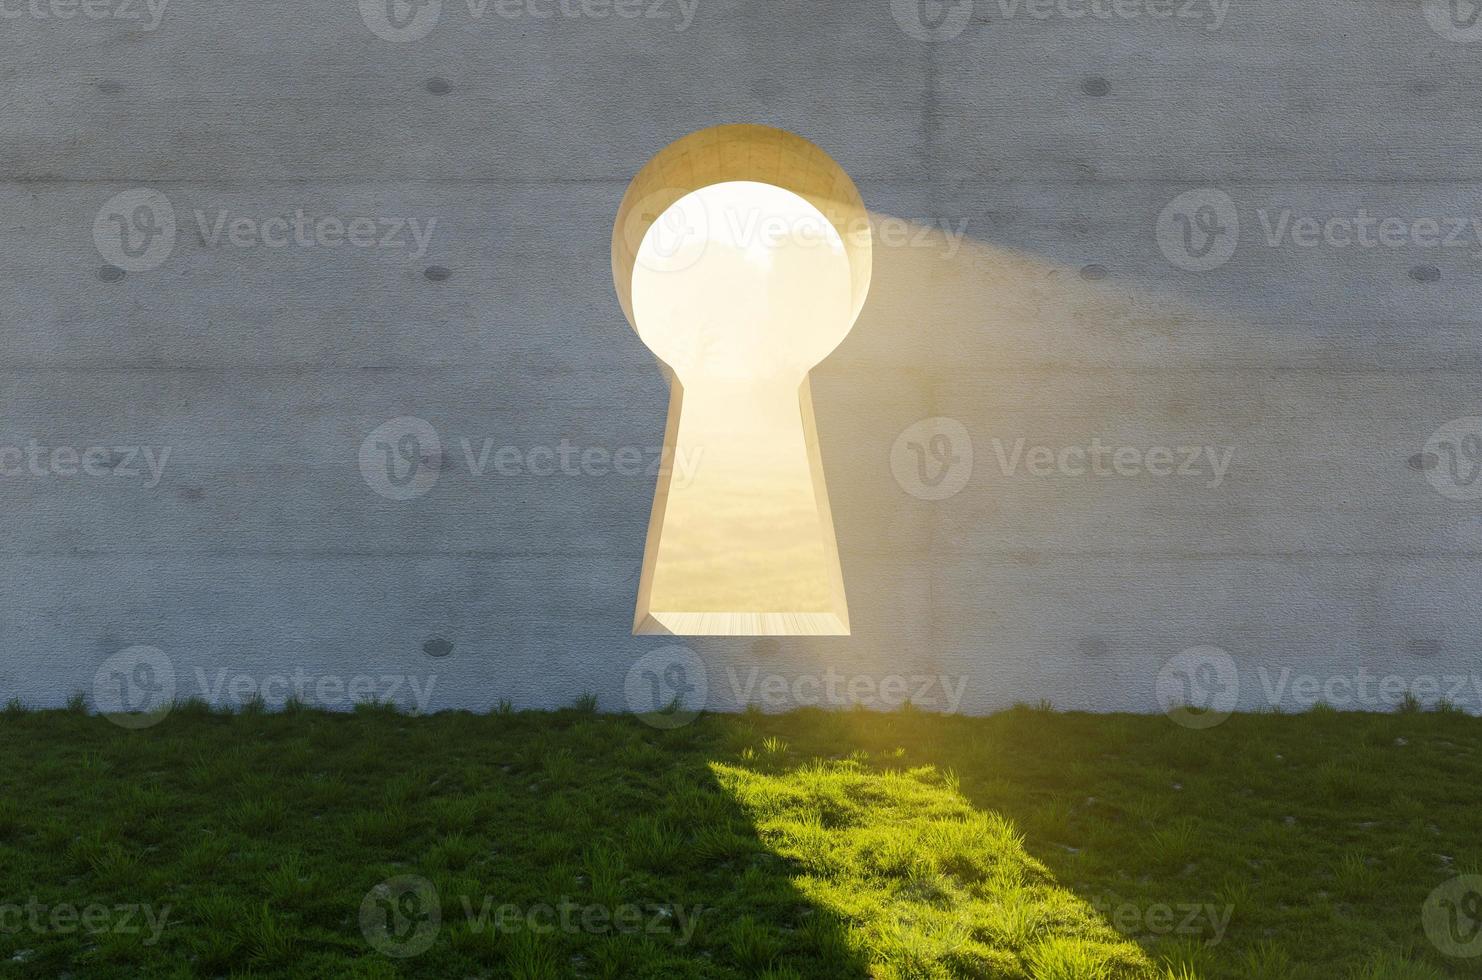 Bright Sun Light Shining Through Keyhole In Concrete Wall in Grass and Rocks Field. photo